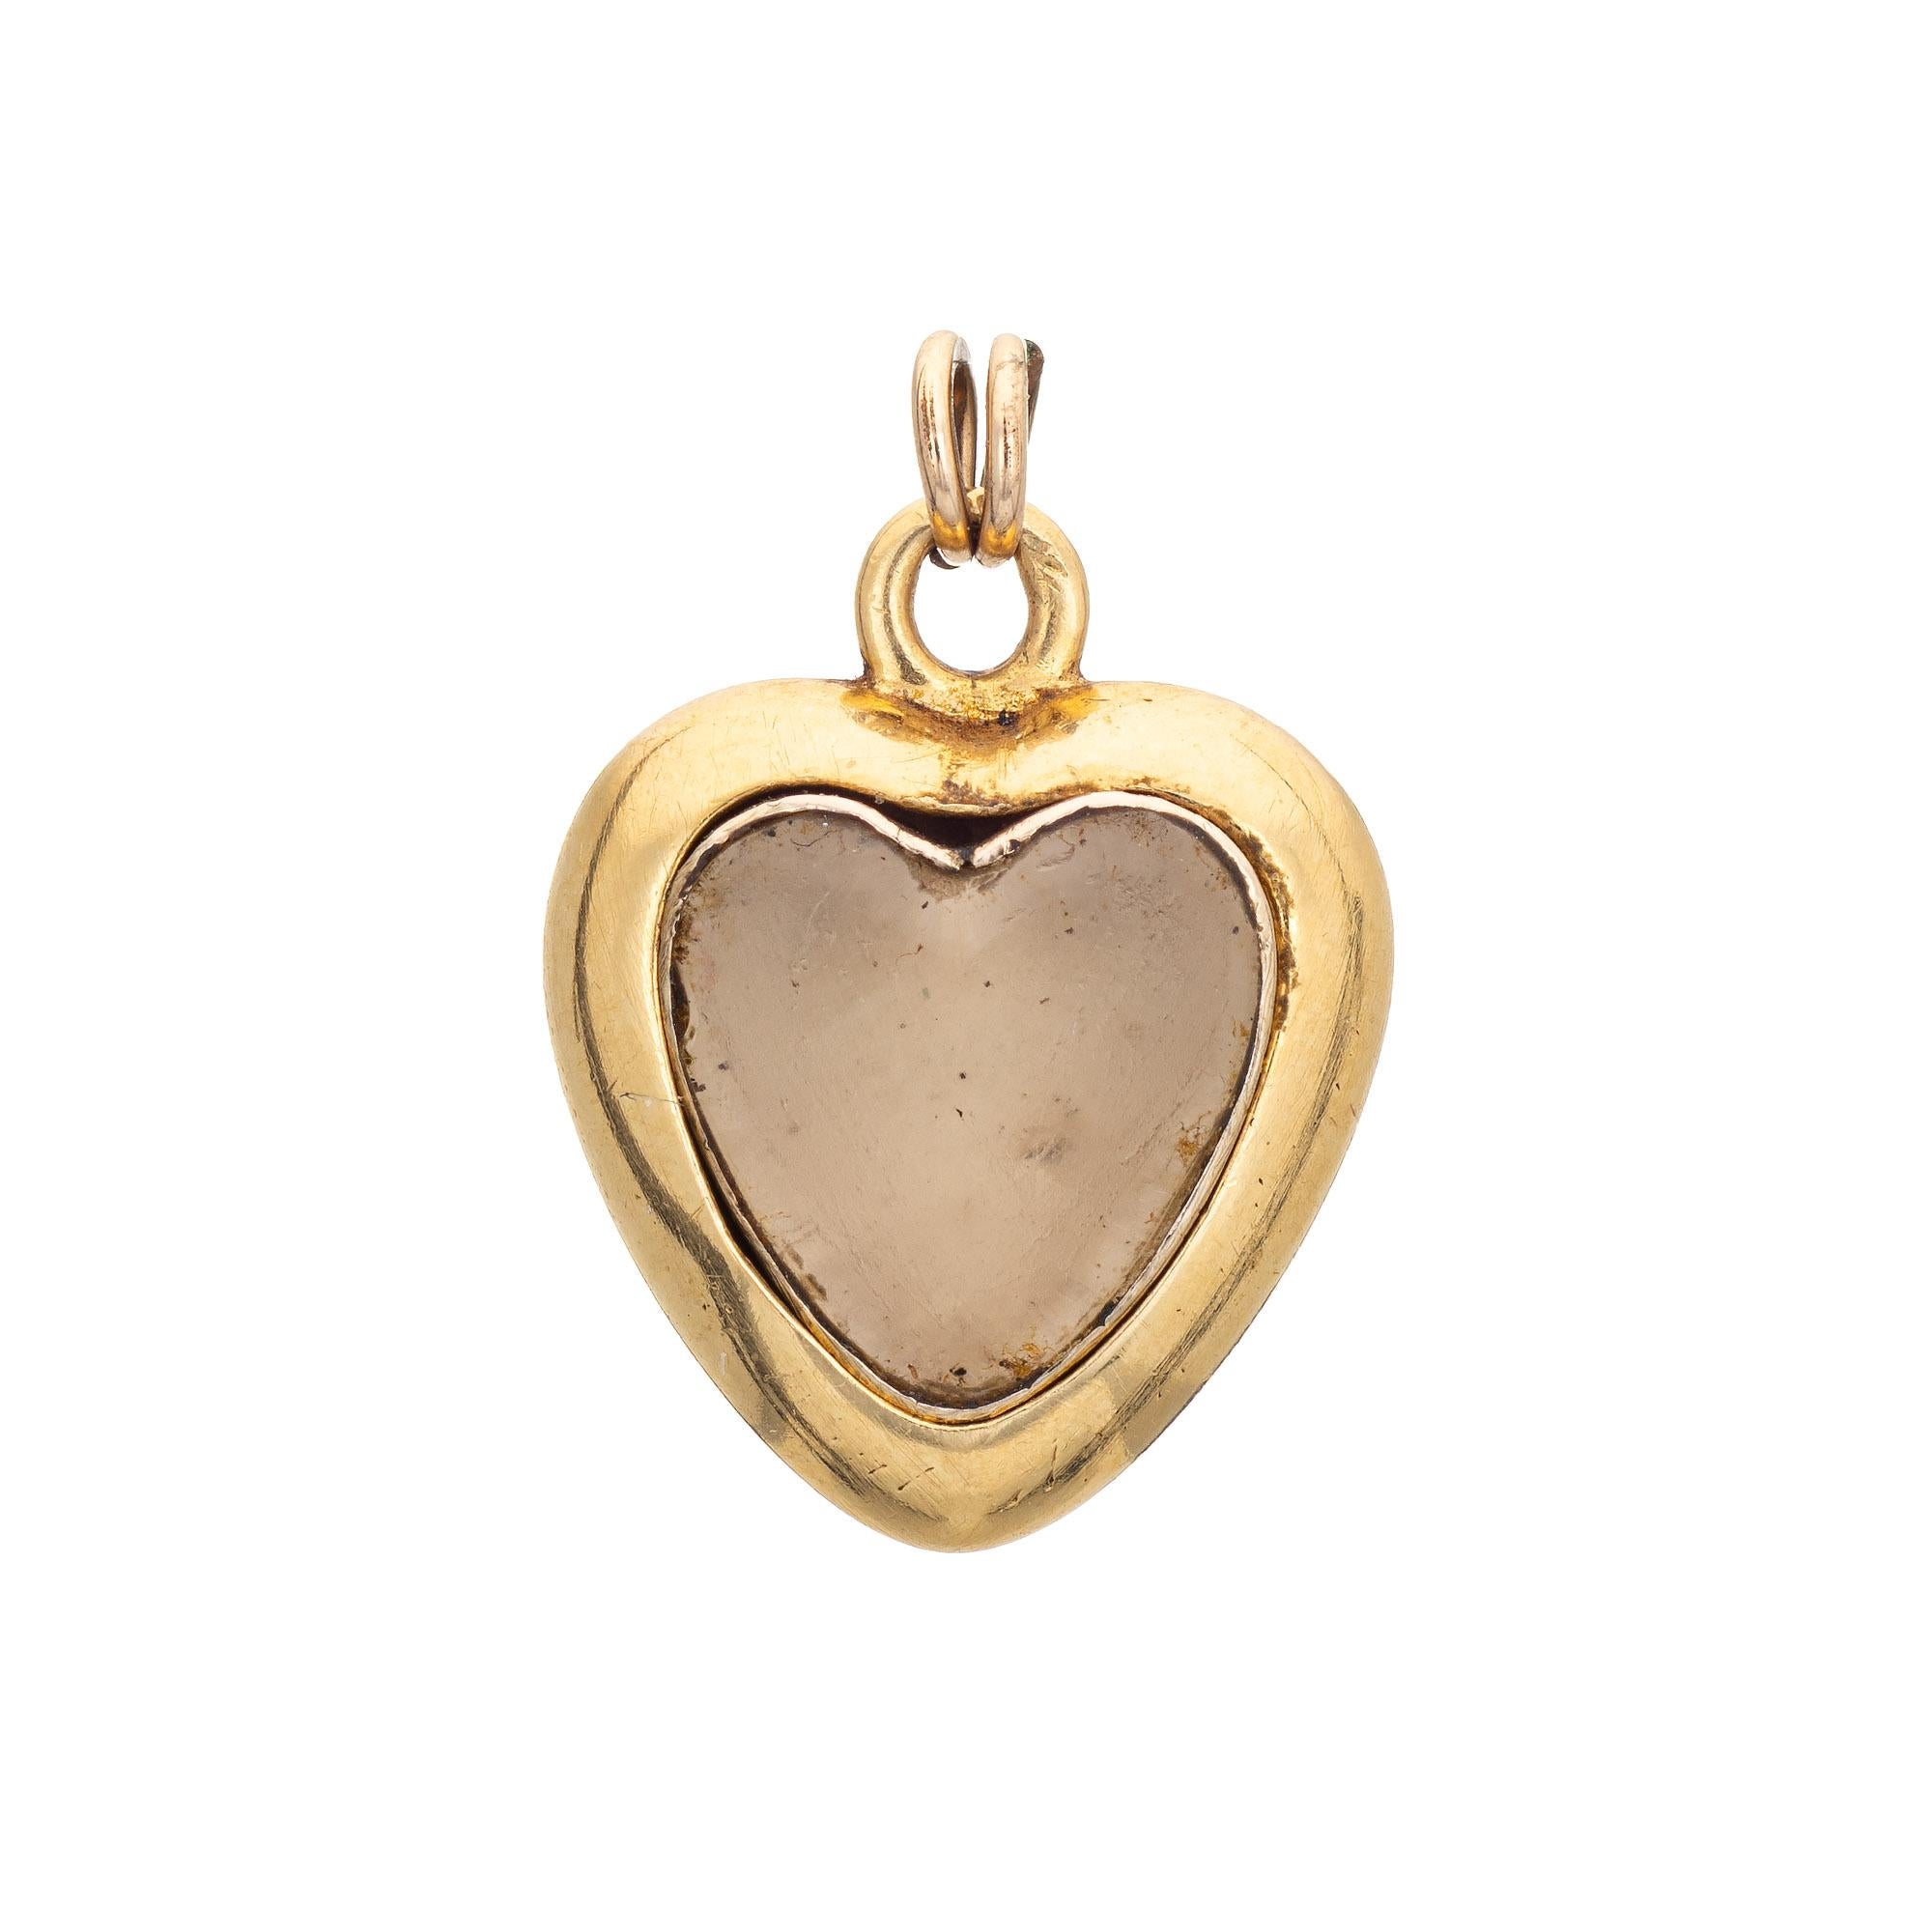 Finely detailed antique Victorian guilloche enamel heart pendant (circa 1880s to 1900s) crafted in 18 karat yellow gold. 

One 3.5mm pearl is set to the center, accented with six estimated 0.01 carat old rose cut diamonds (estimated at J-K color and